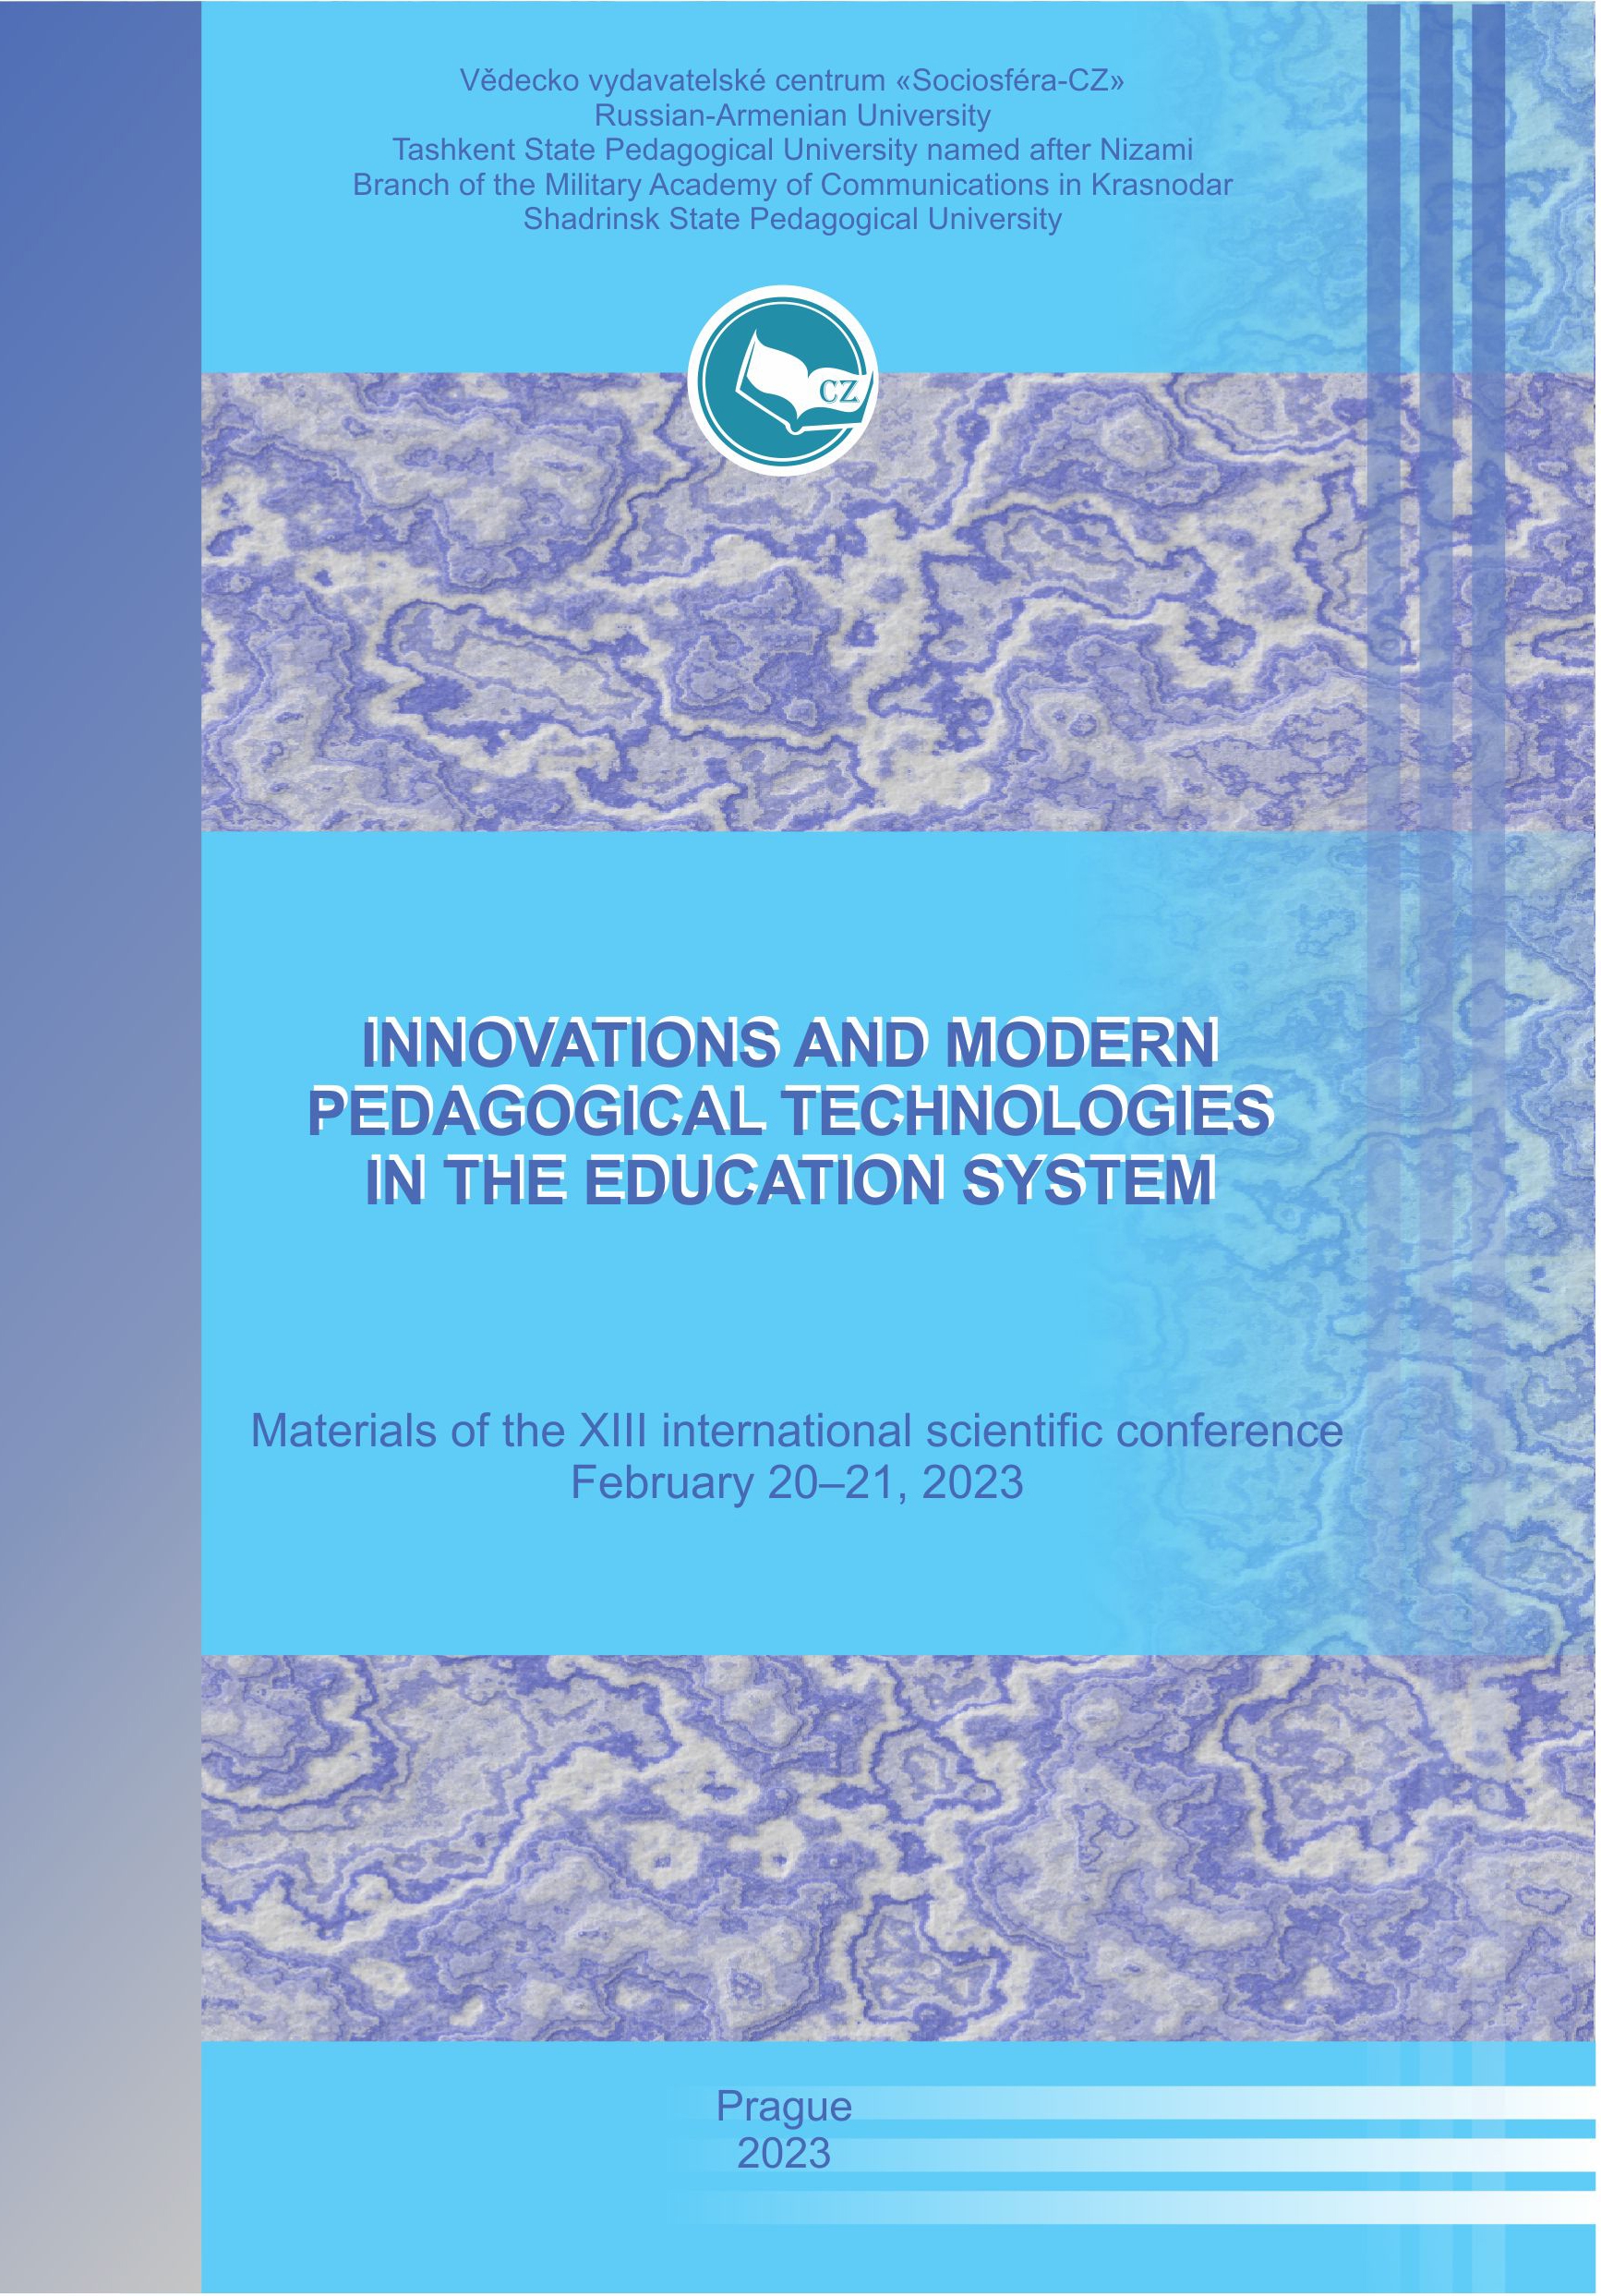 Innovations and modern pedagogical technologies in the education system